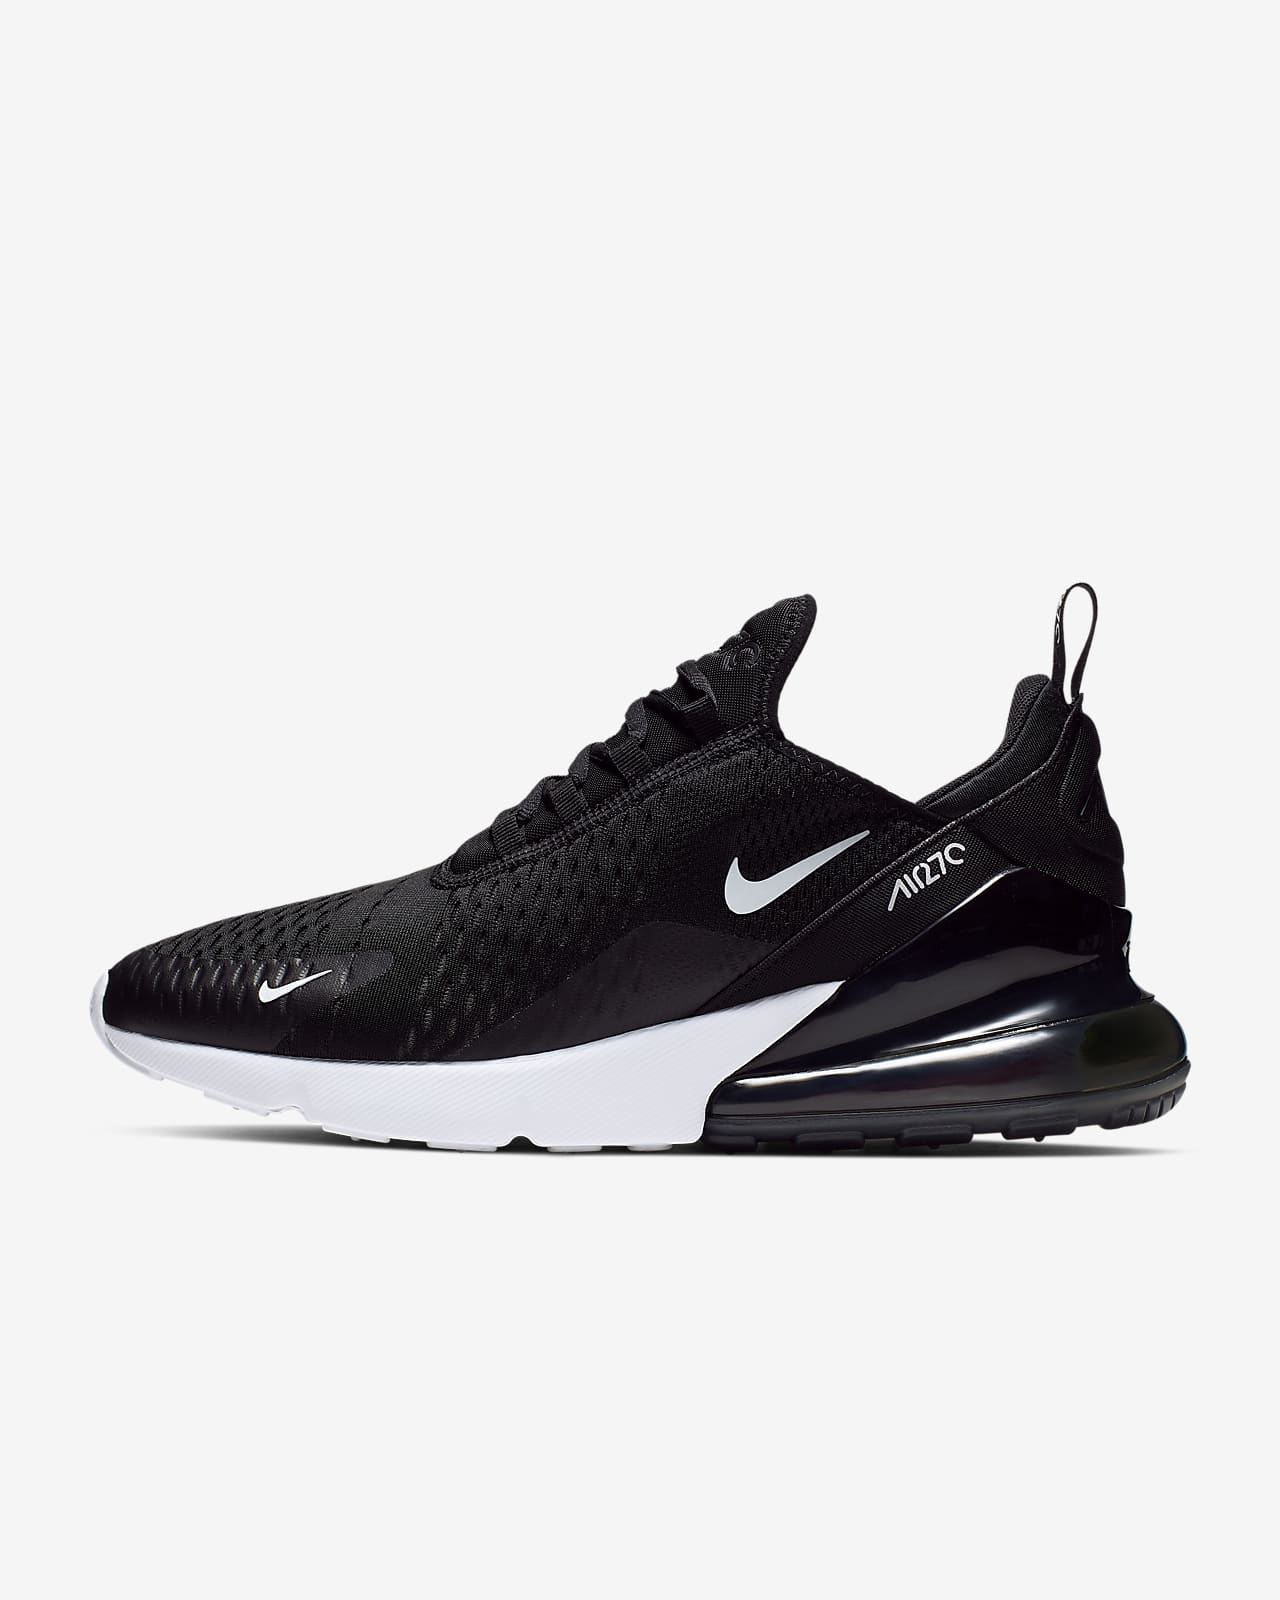 nike air max 270 good for working out